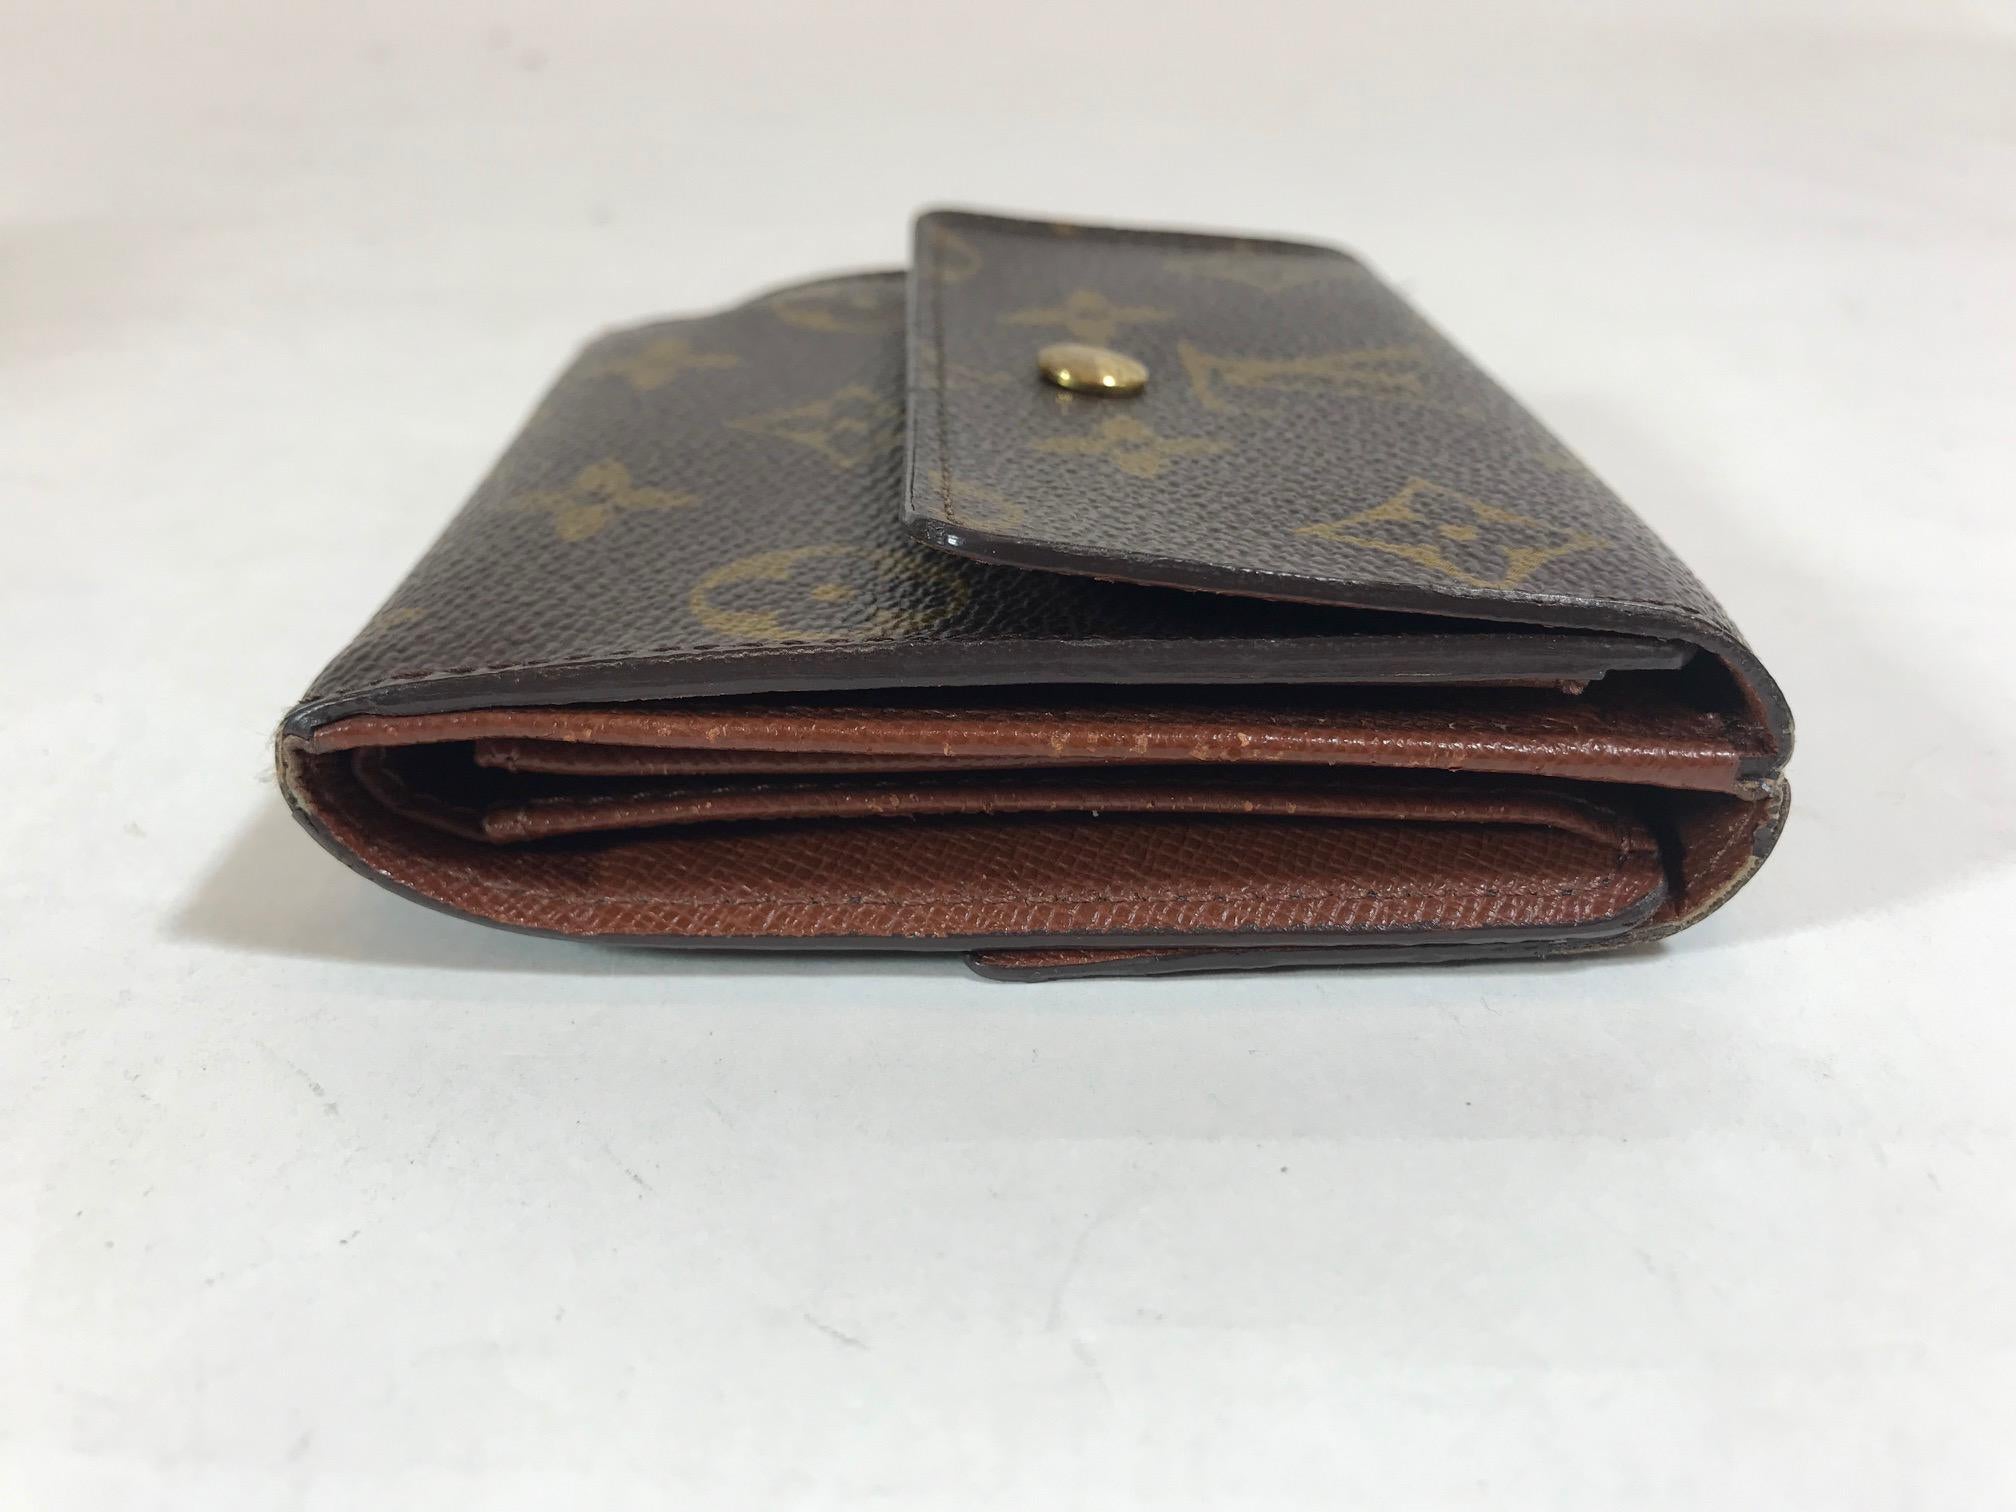 Louis Vuitton Monogram Elise Wallet In Good Condition For Sale In Roslyn, NY